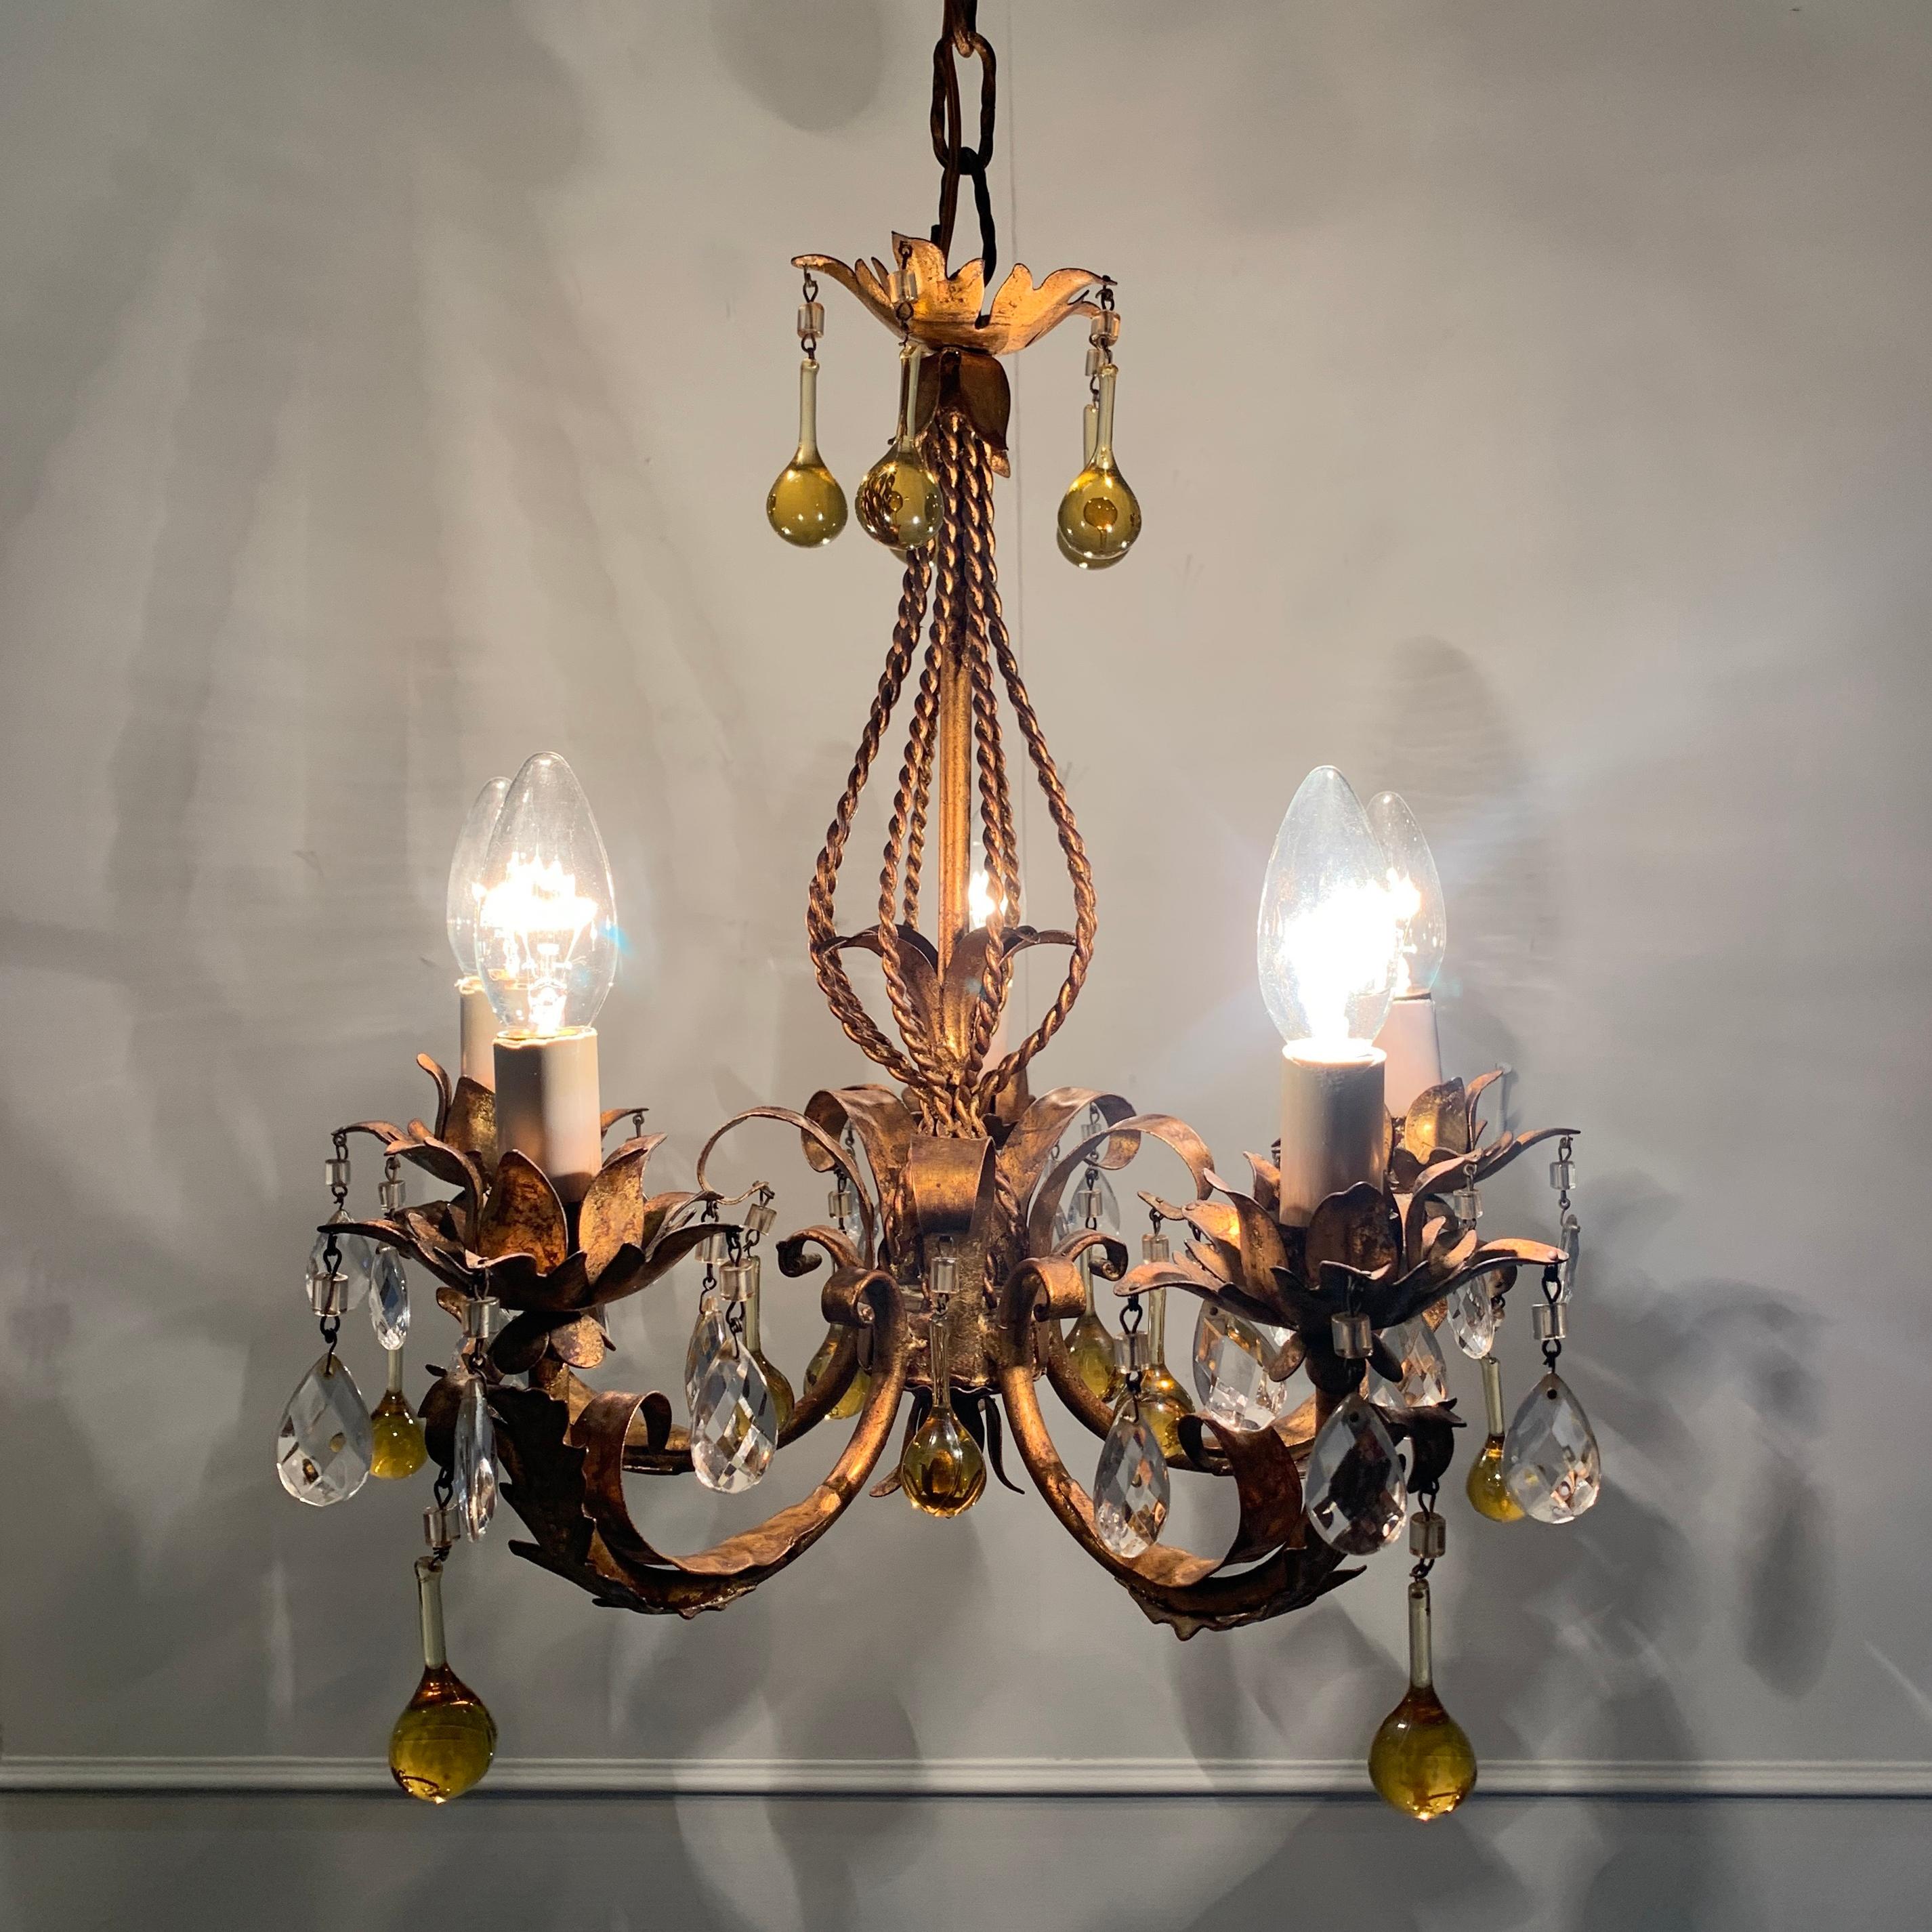 Italian Murano glass drop gilt chandelier
Italy, circa 1960s
Gilt leaves decorate the gilt rope detail central column
Large hanging hand blown golden Murano glass droplets are hung from the lampholders and top crown of the light
Smaller faceted